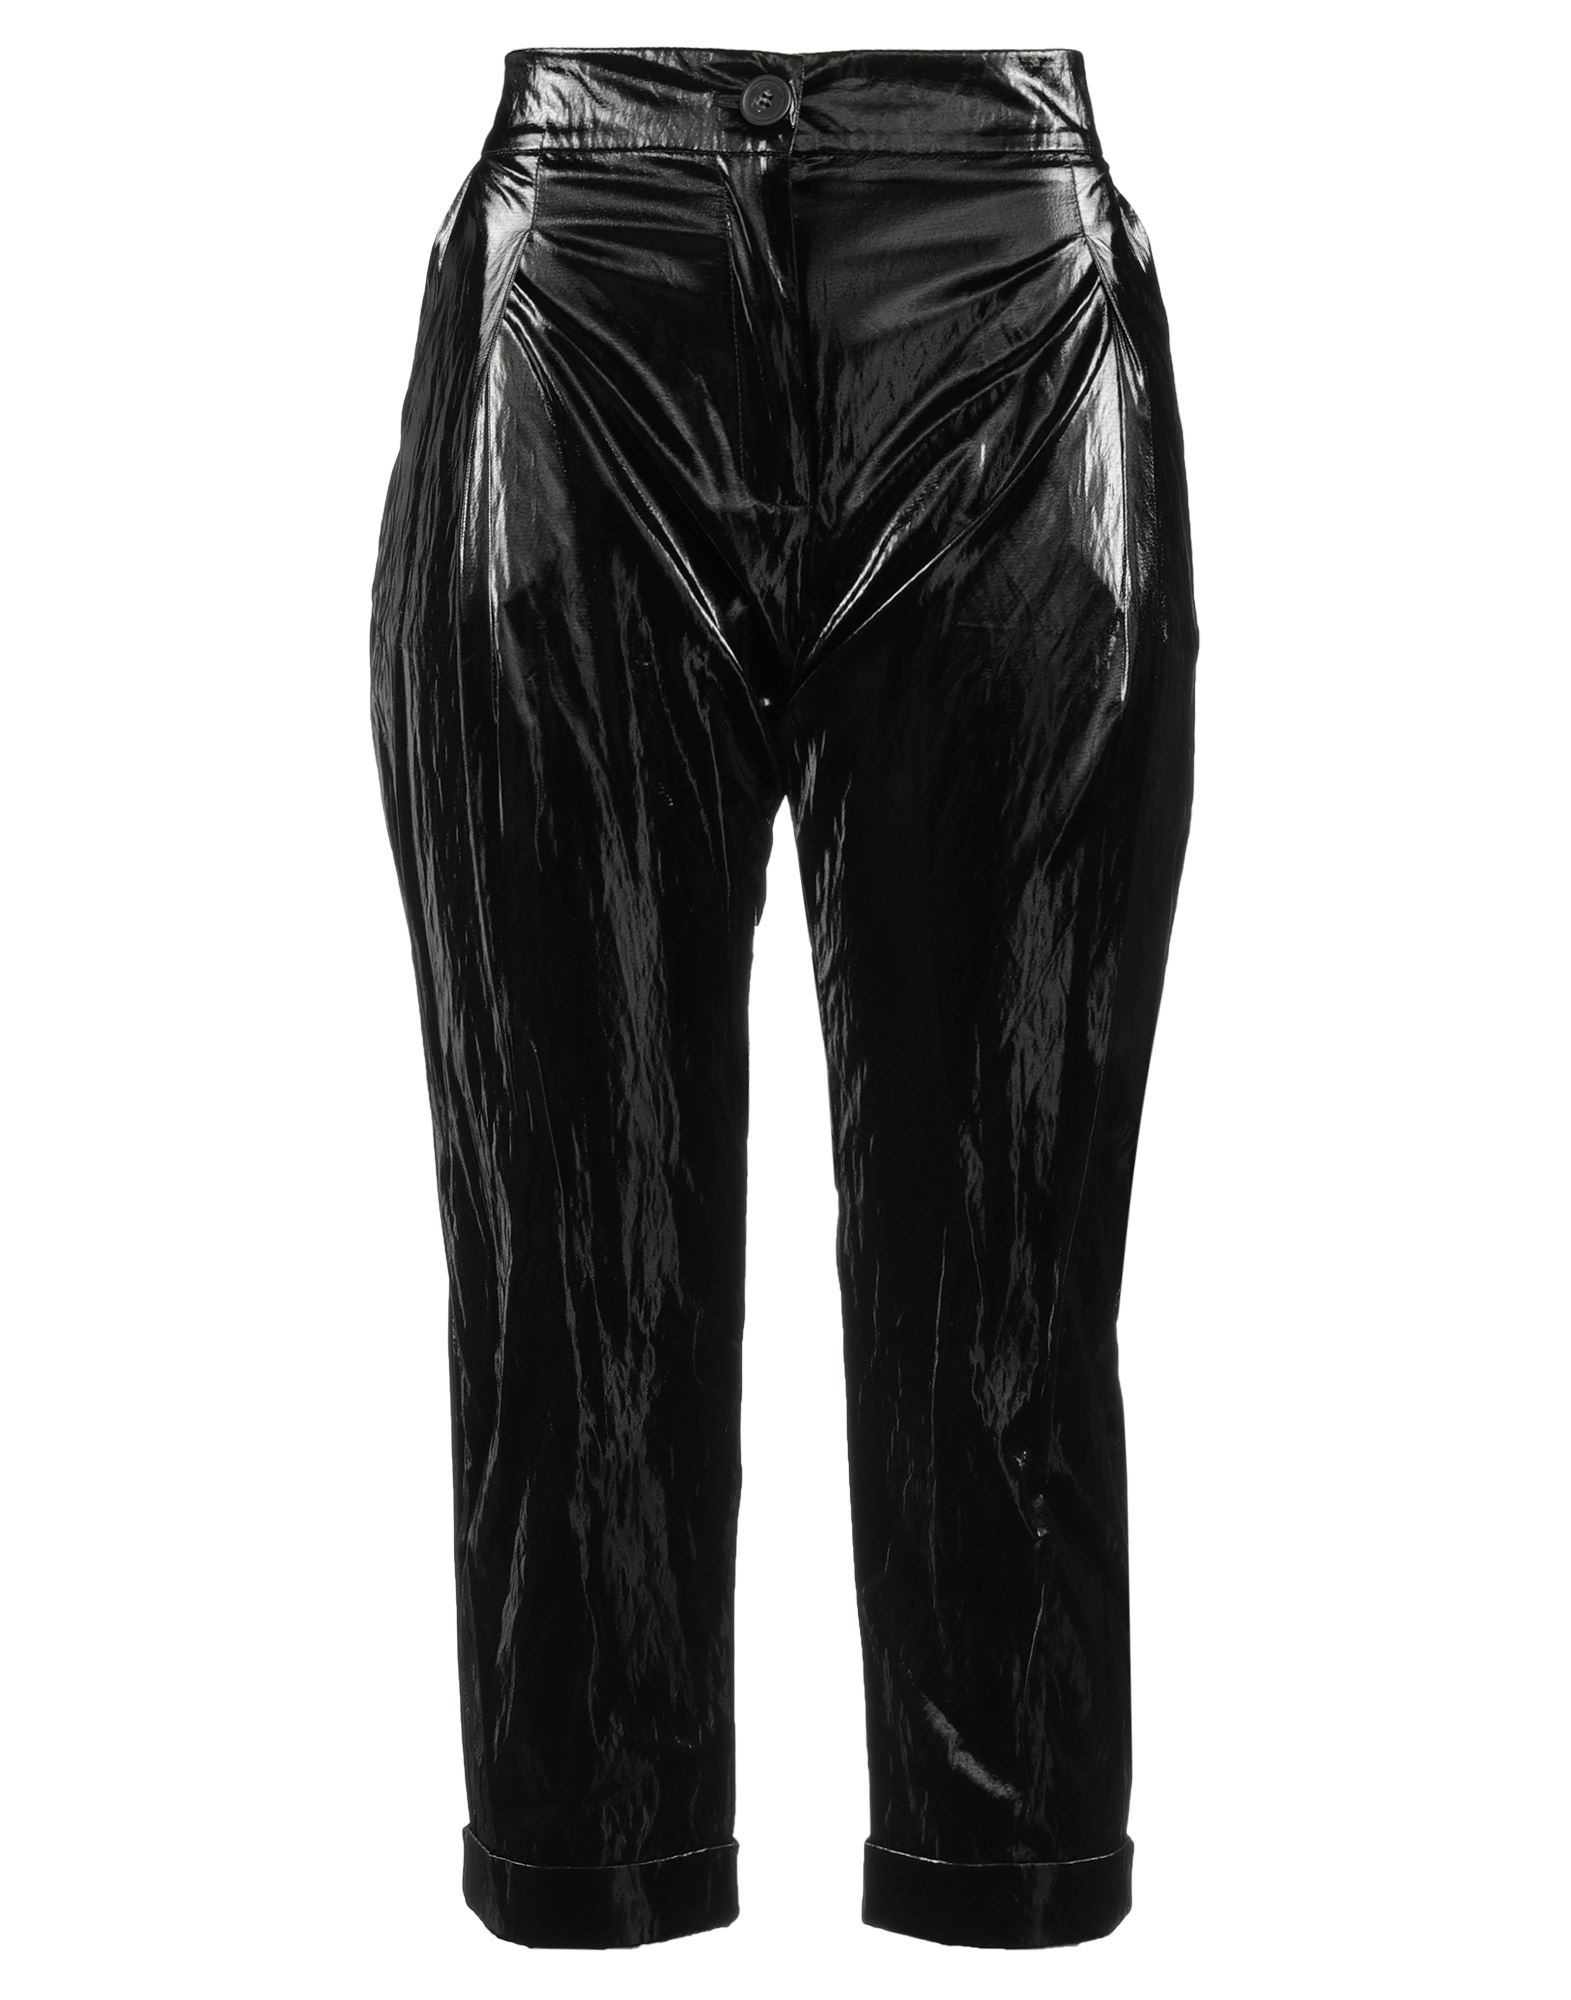 Rue 8isquit Cropped Pants In Black